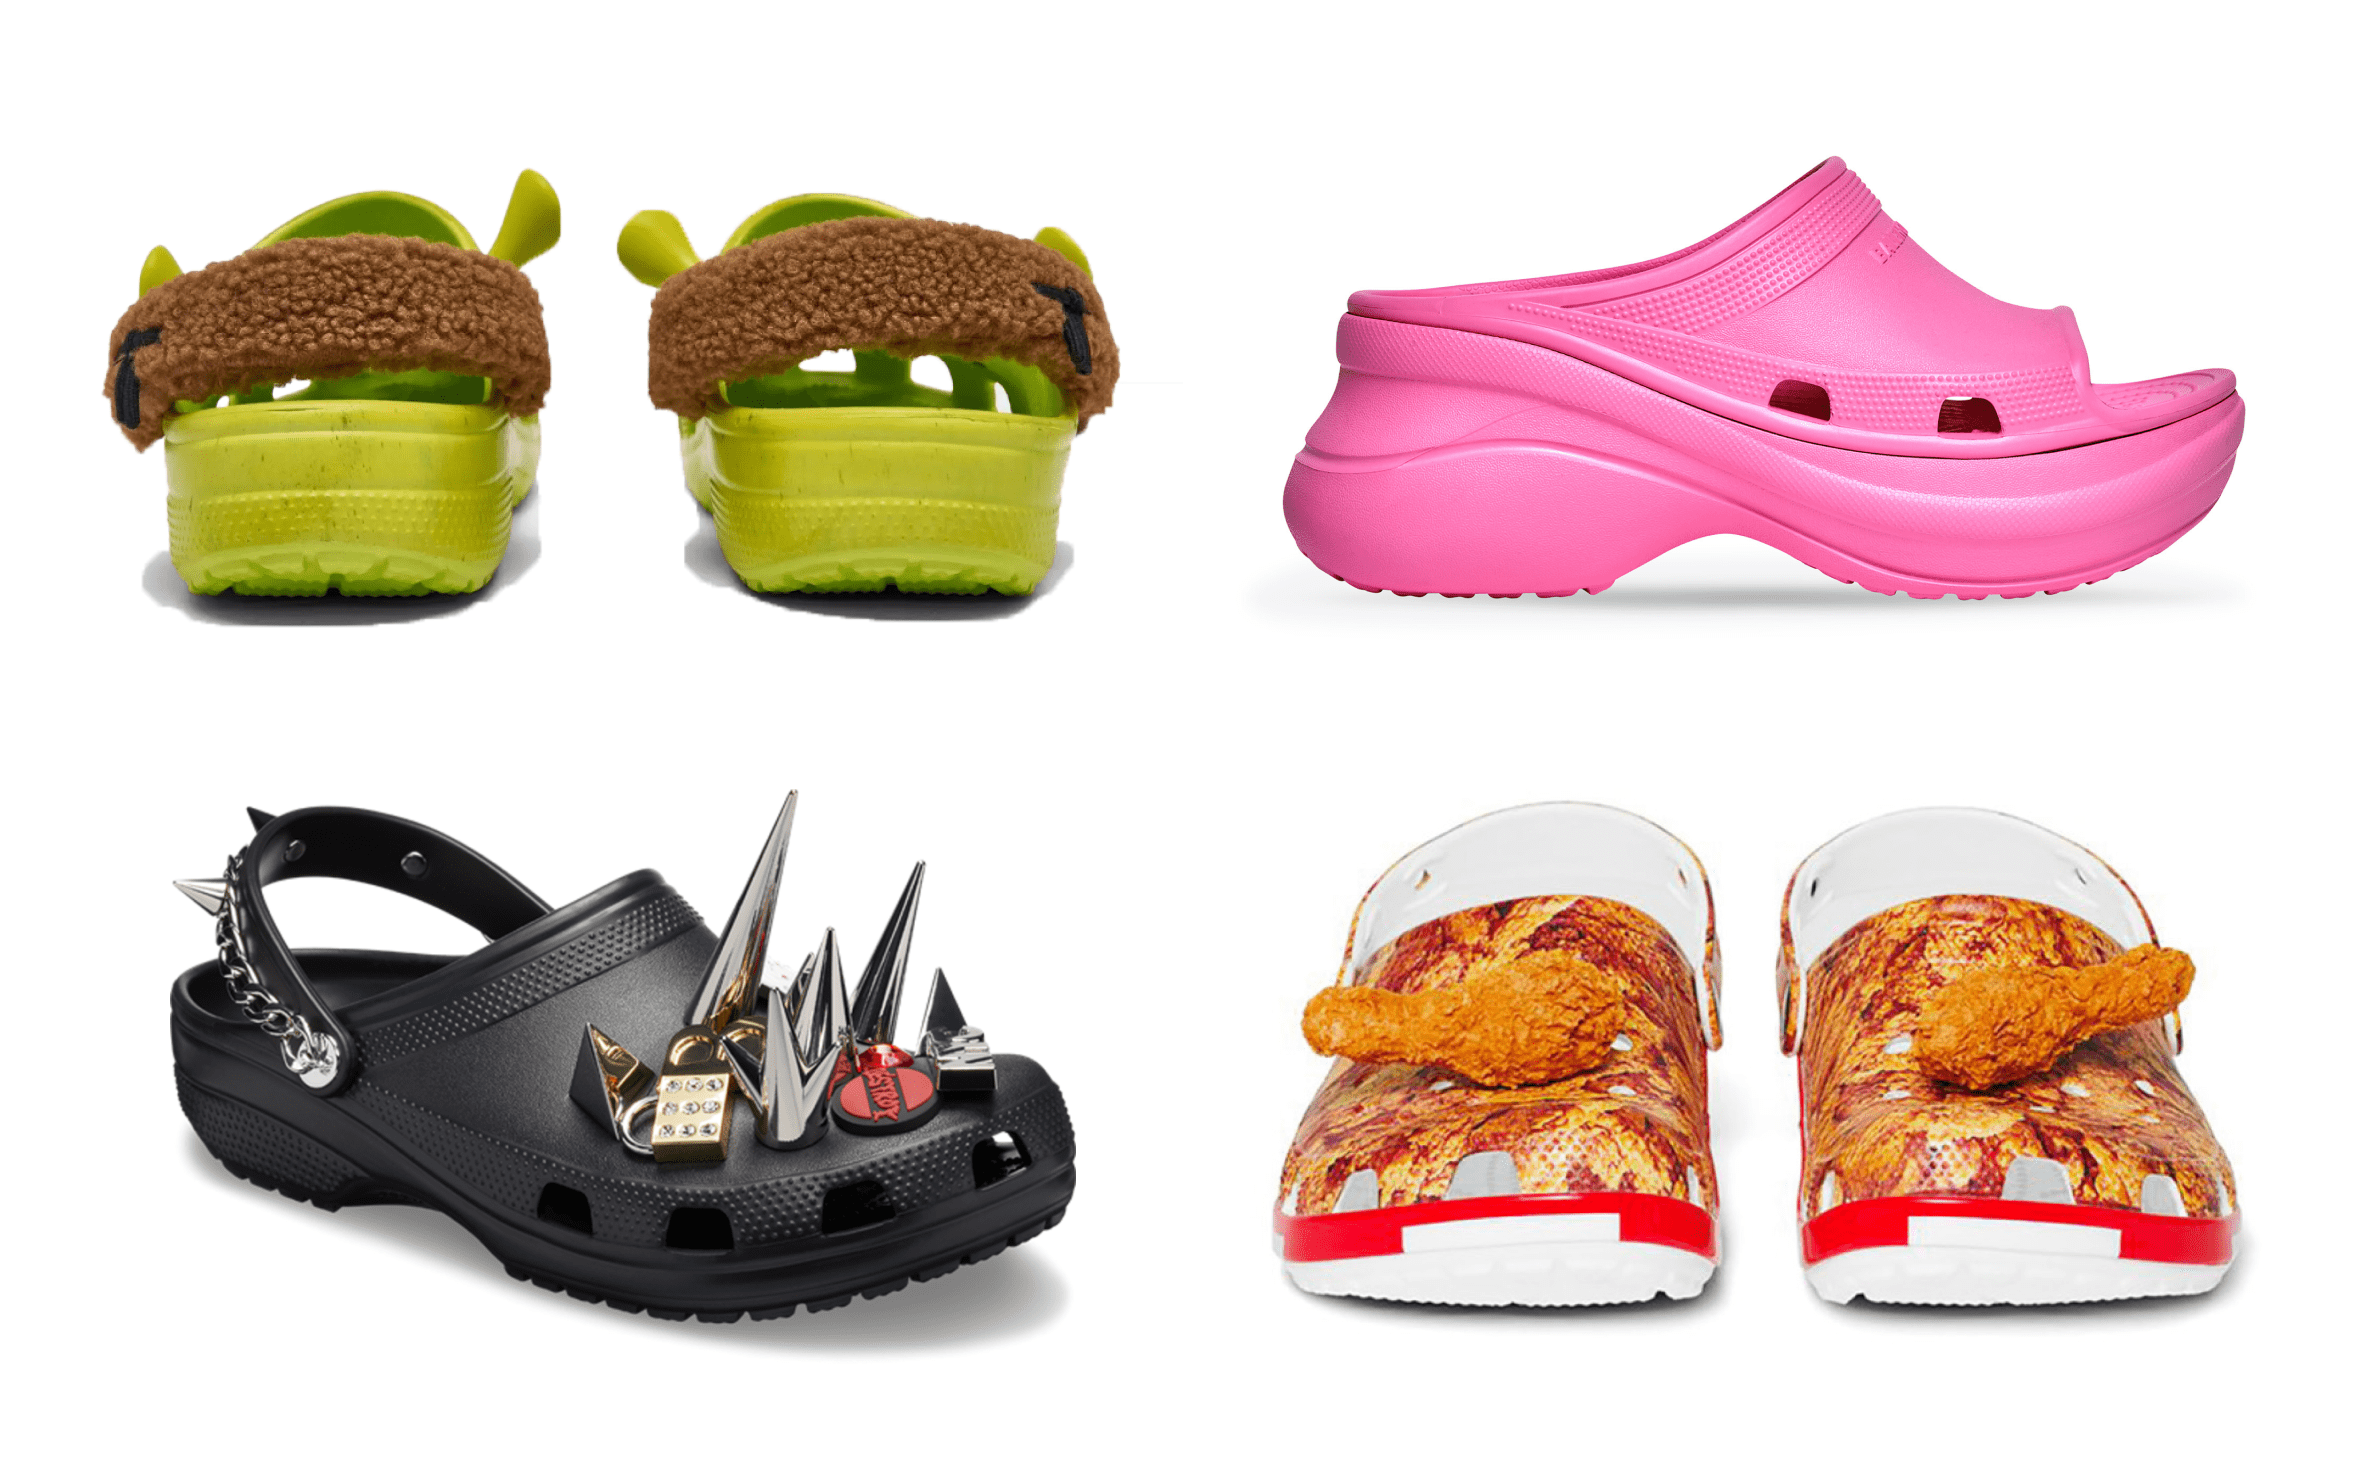 Crocs are releasing Shrek clogs and we're not sure how we feel